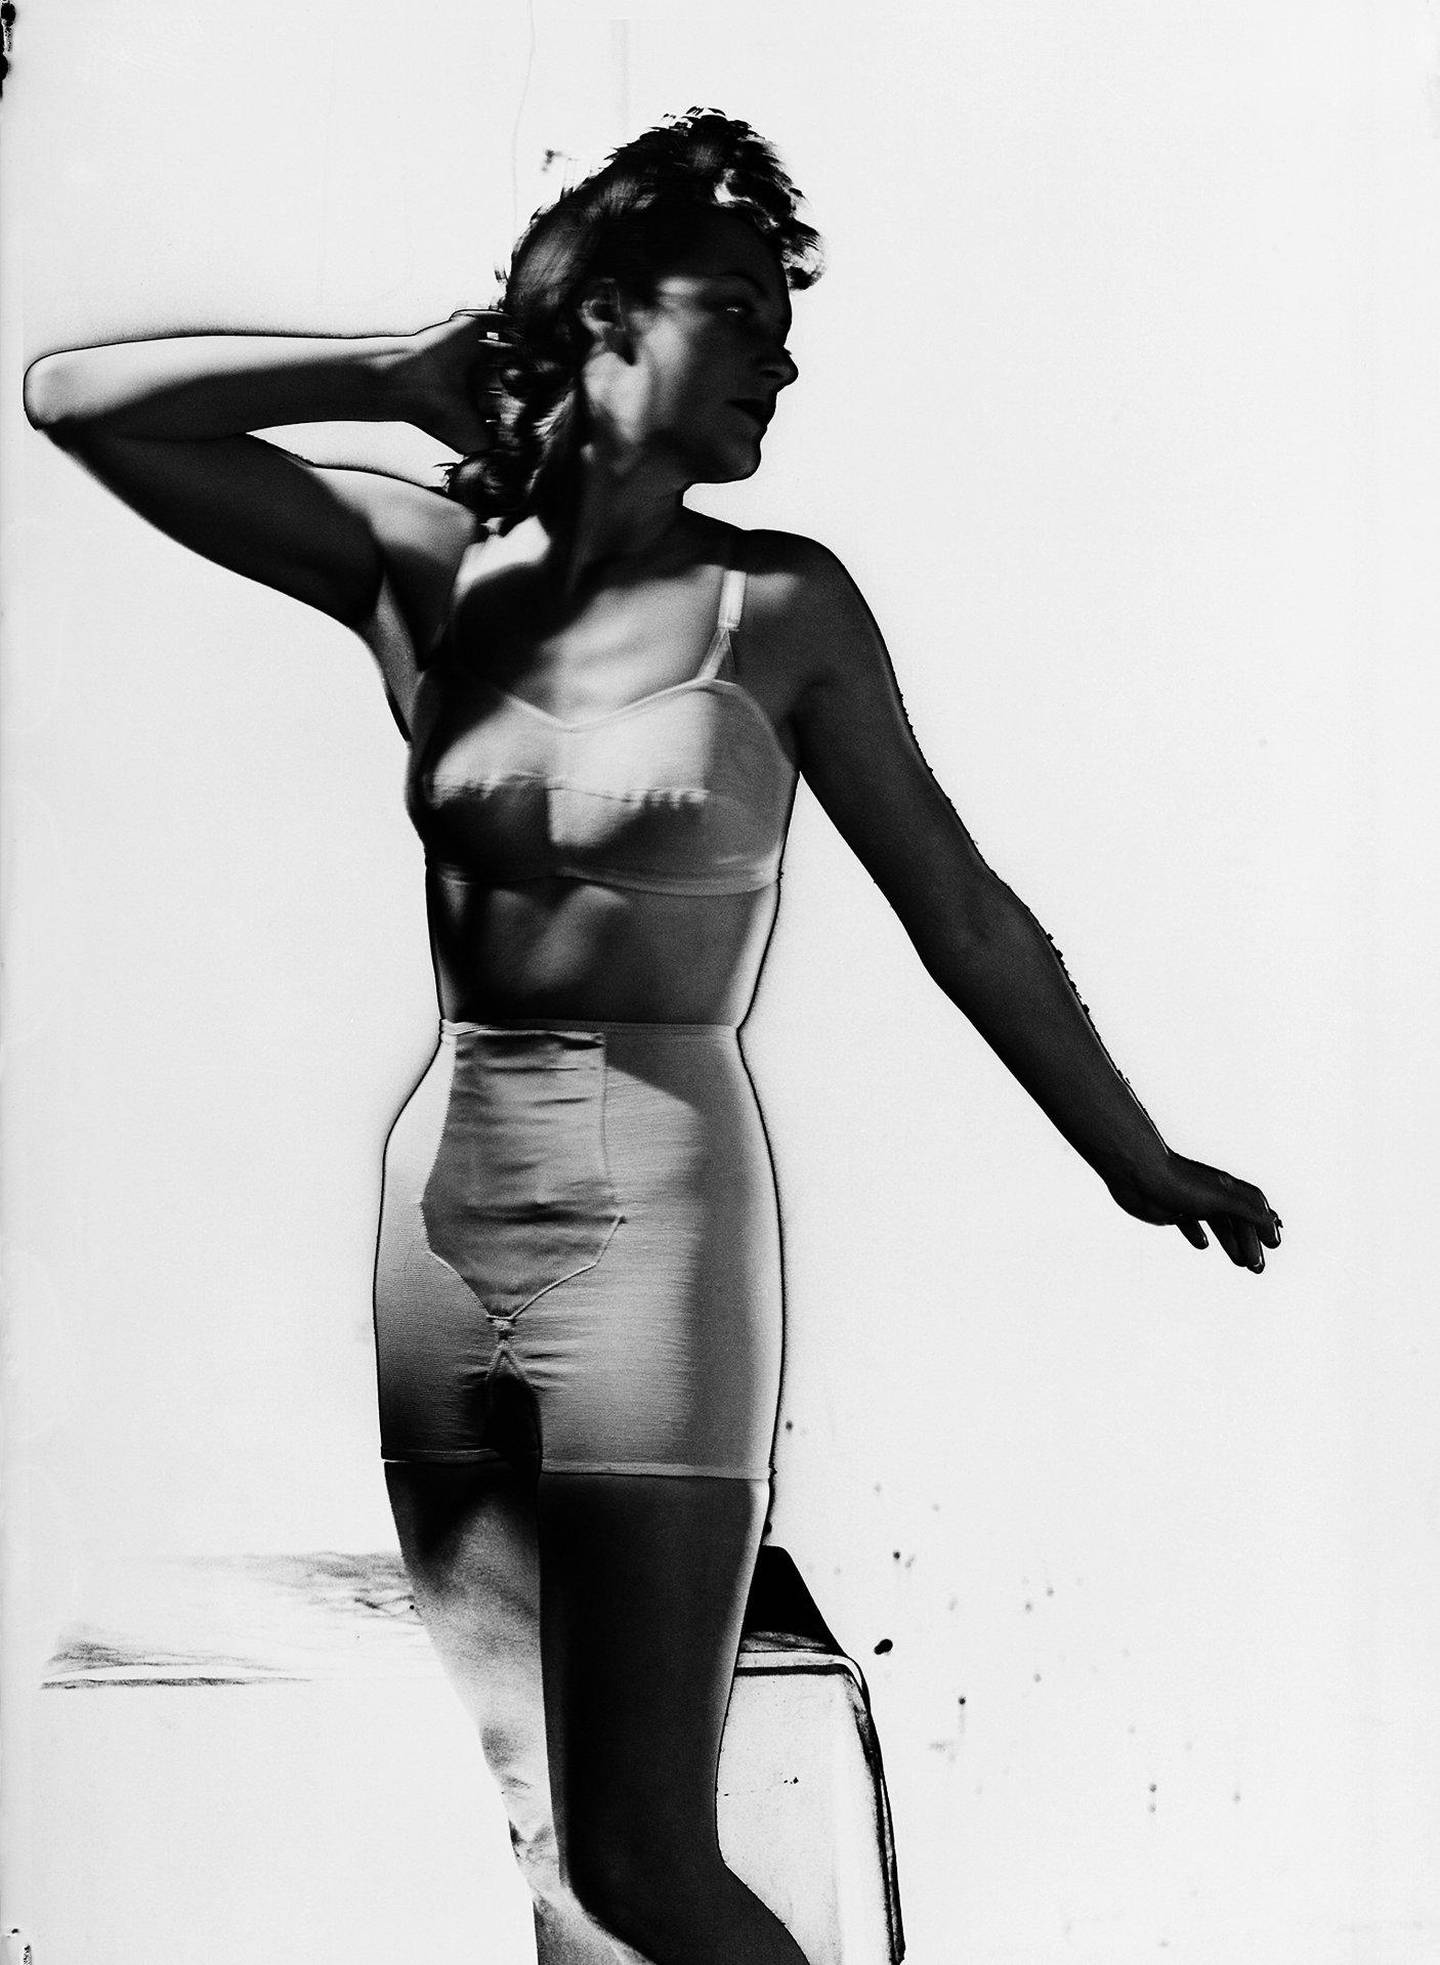 Lee Millers «Corsetry, Solarised Photograph, Vogue Studio London, England, 1942.
FOTO: © Lee Miller Archives England 2018. All Rights Reserved. www.leemiller.co.uk